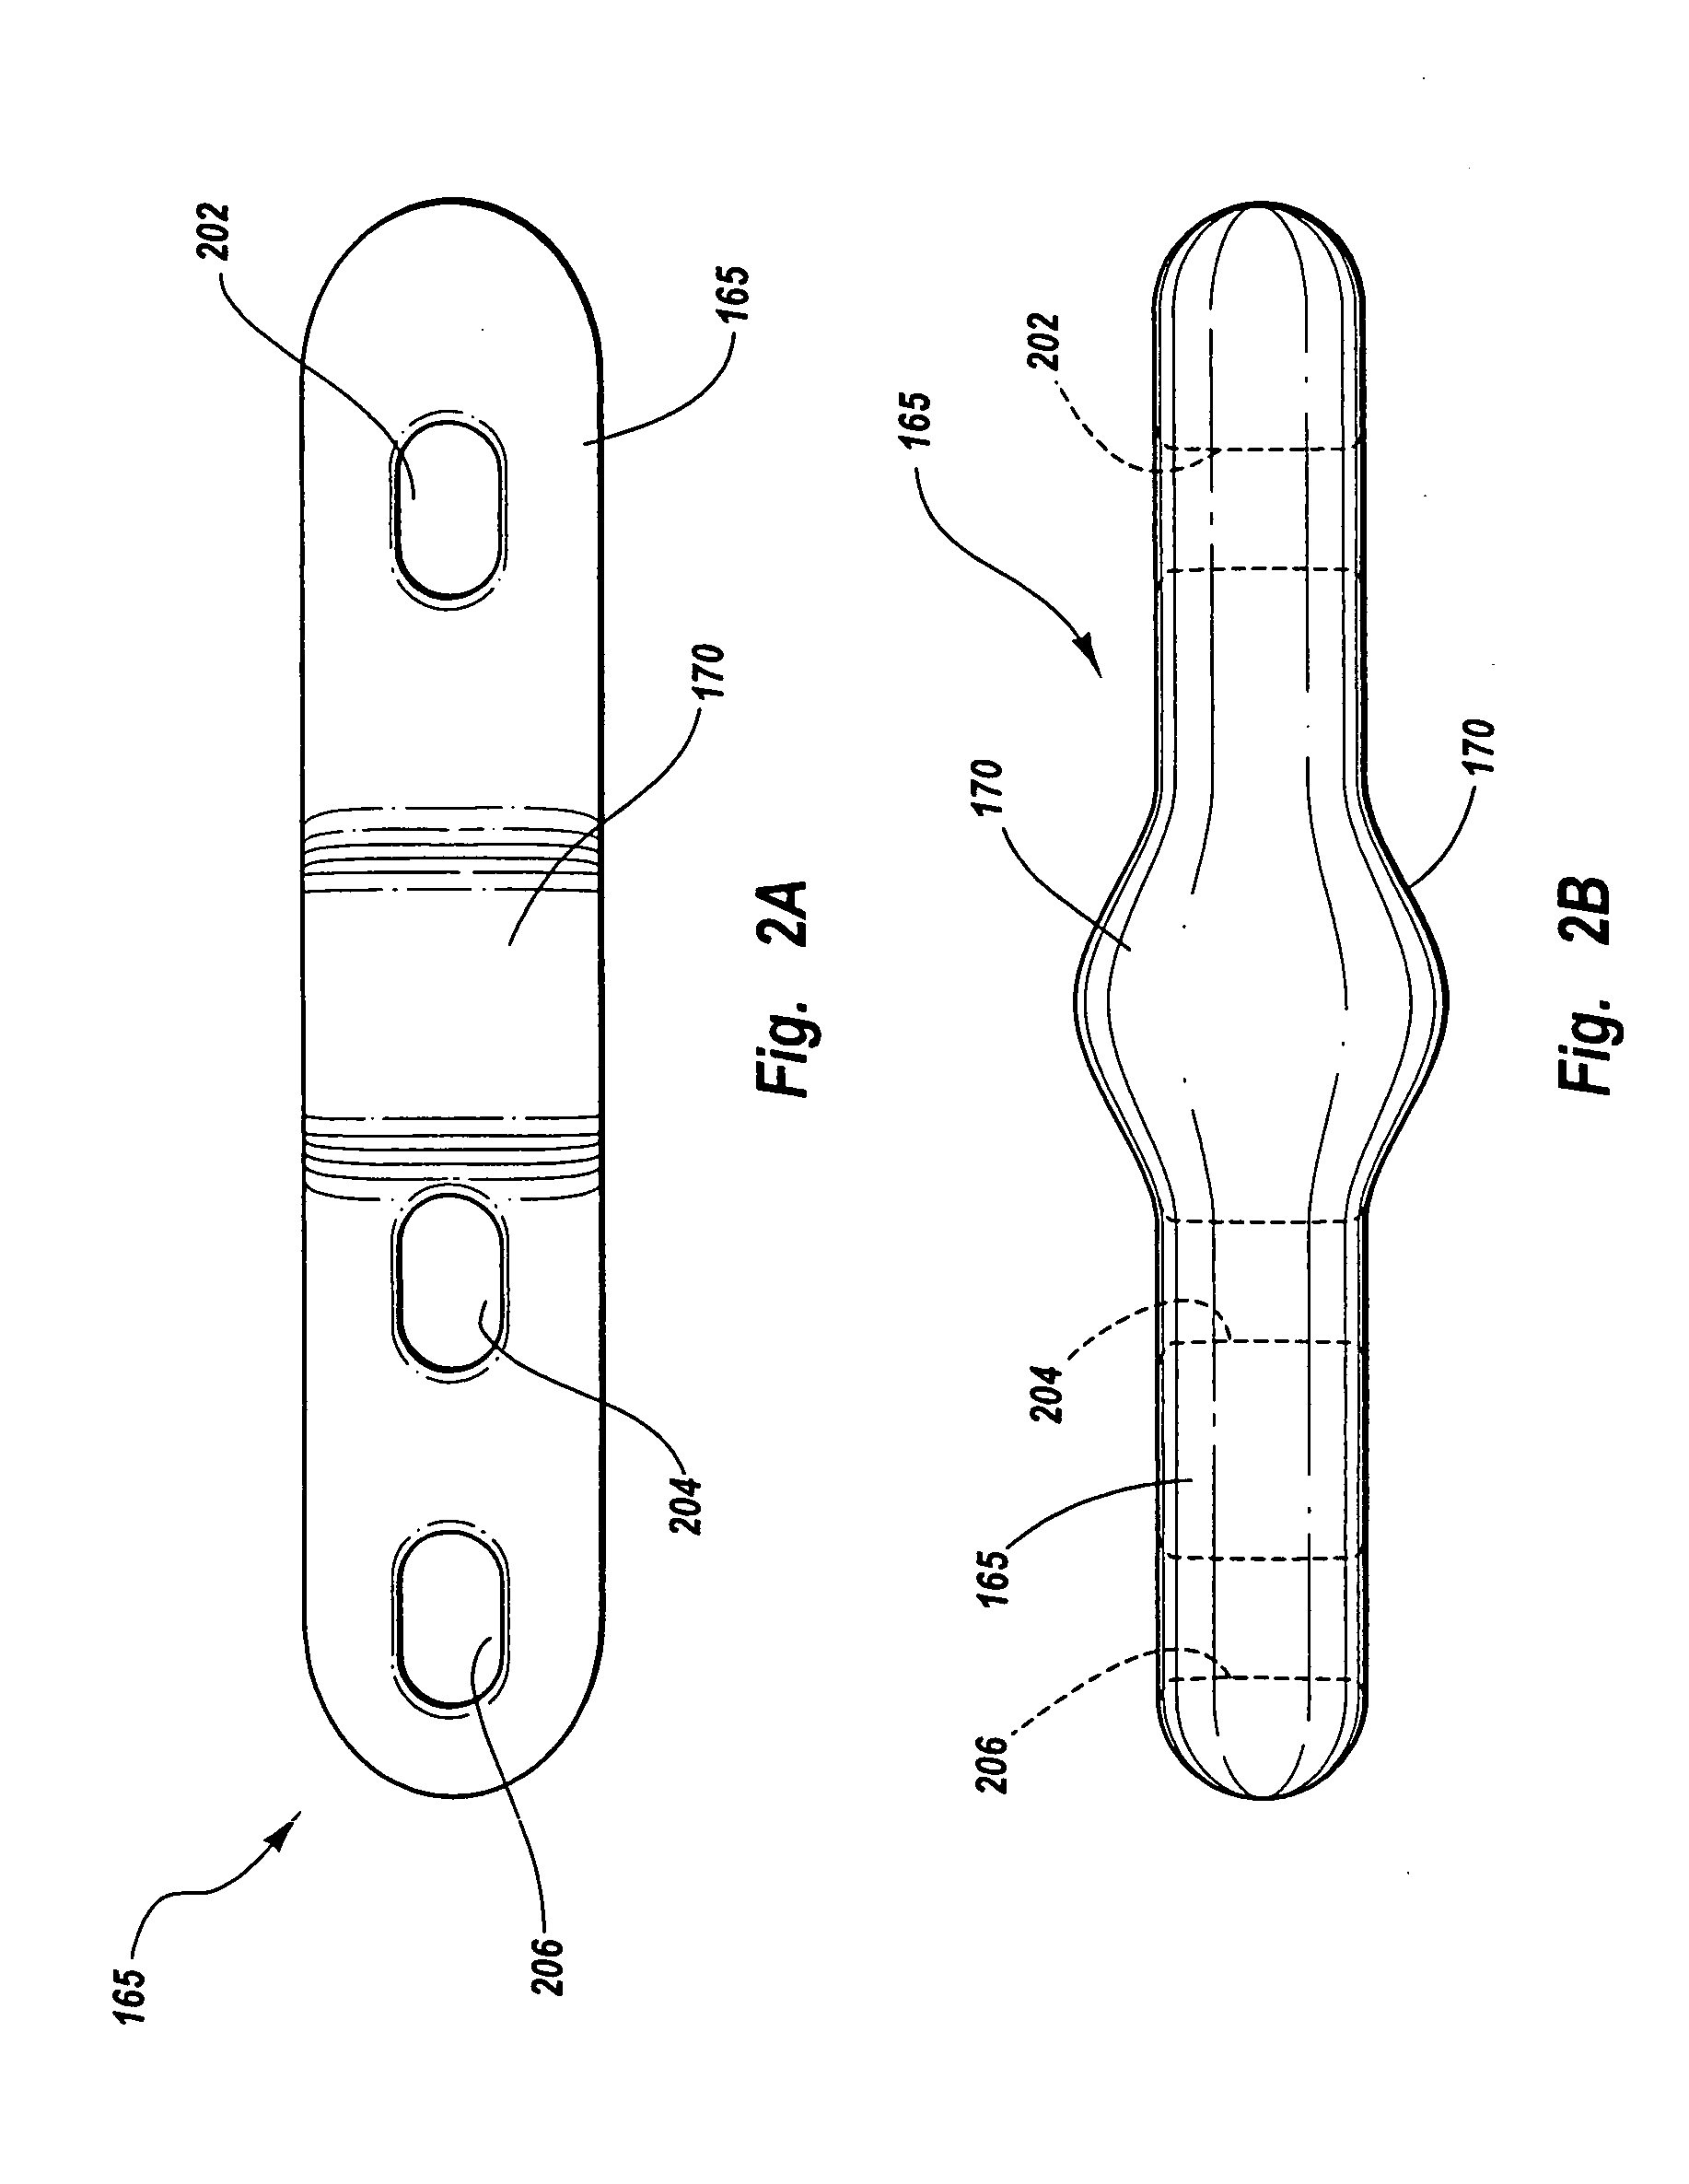 Method and apparatus for sealing an internal tissue puncture incorporating a block and tackle